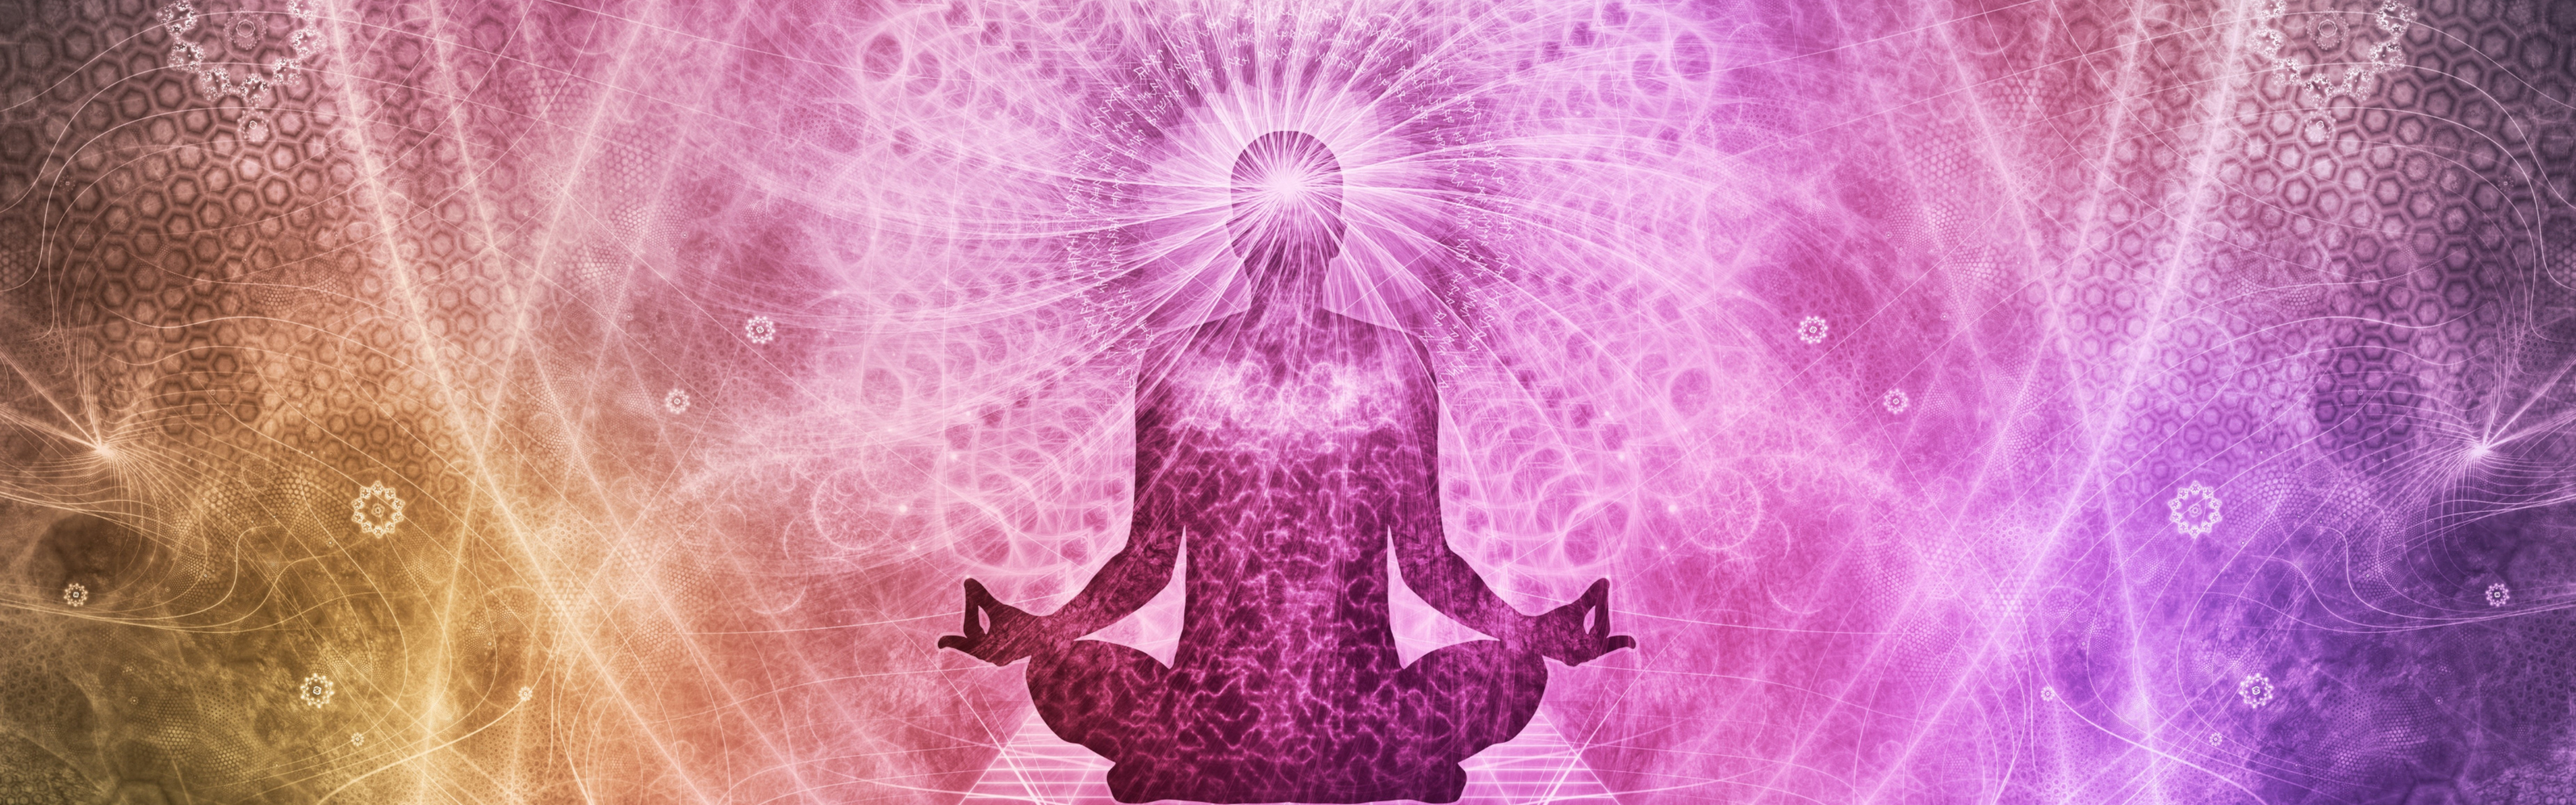 energy waves and mandalas surrounding a seated person